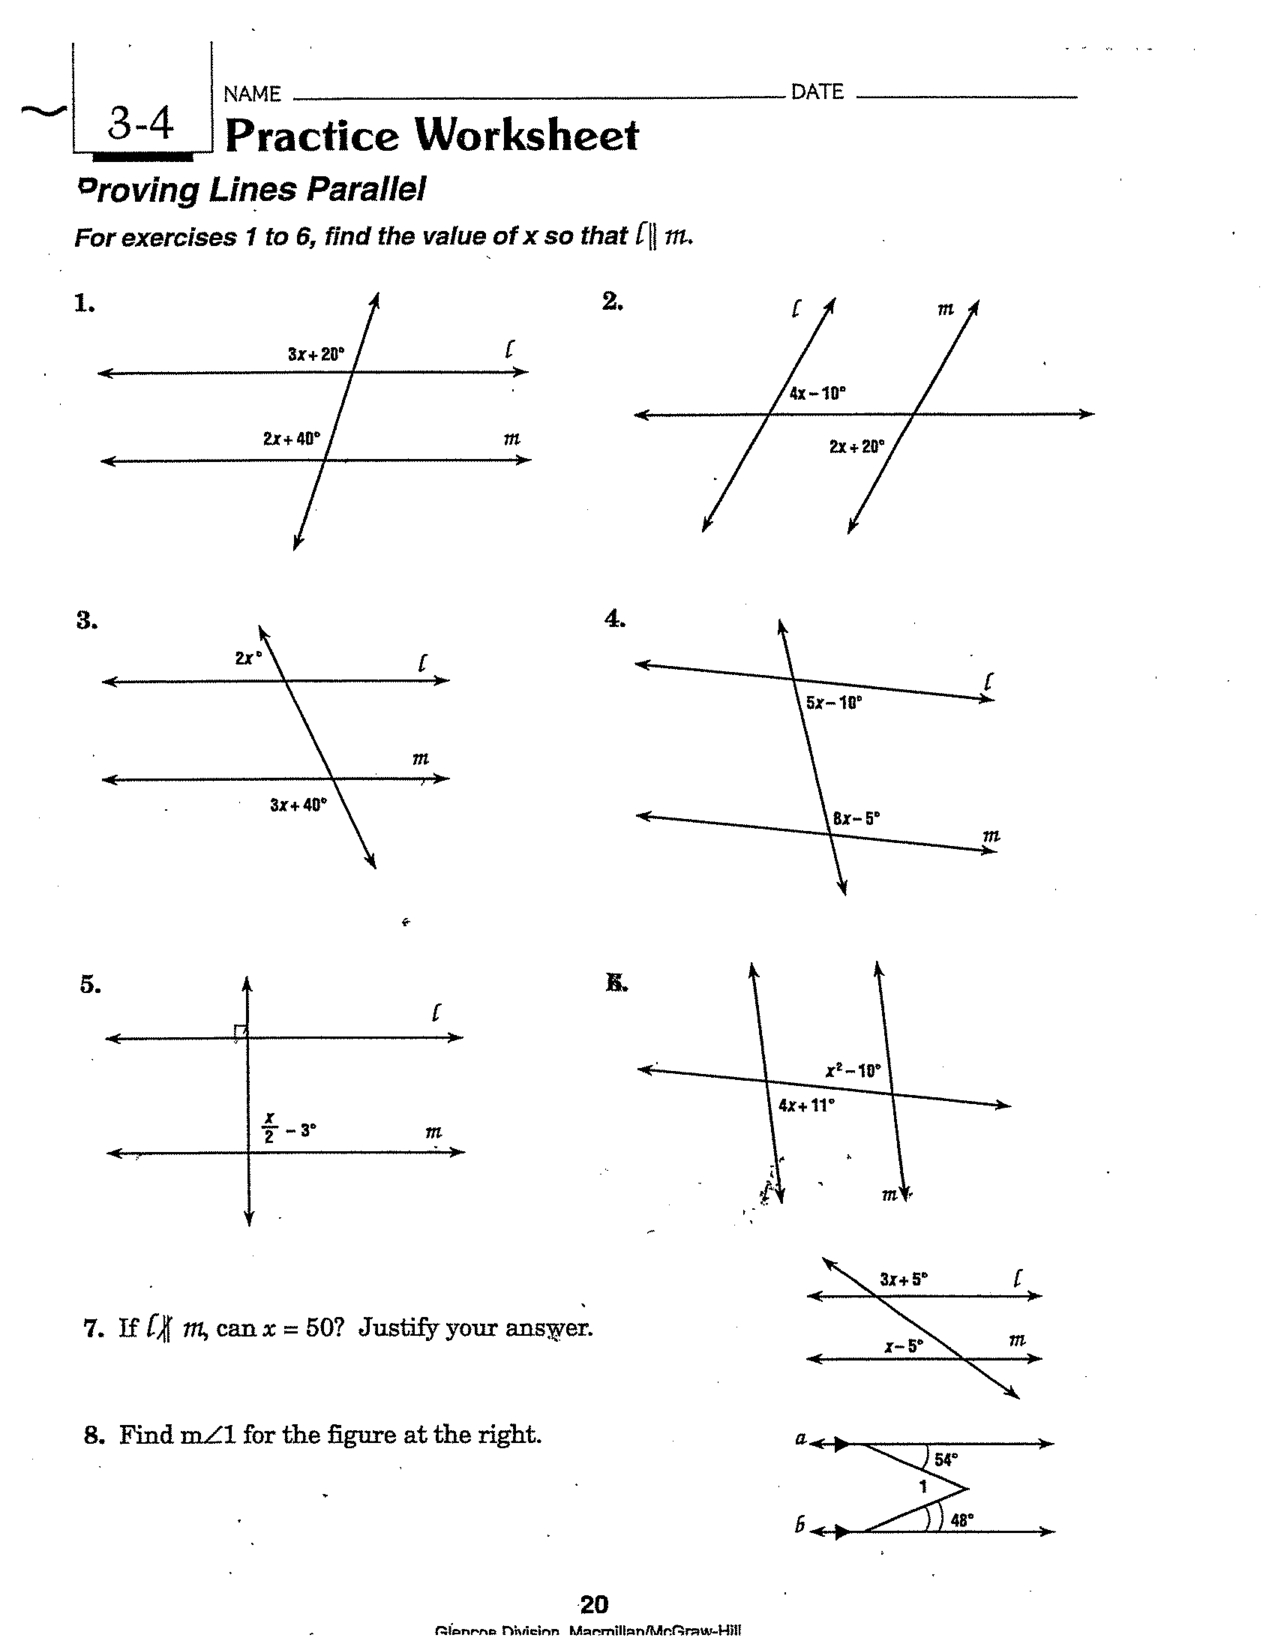 Awesome Collection Of Kindergarten Lines And Angles Worksheet 28 For Lines And Angles Worksheet